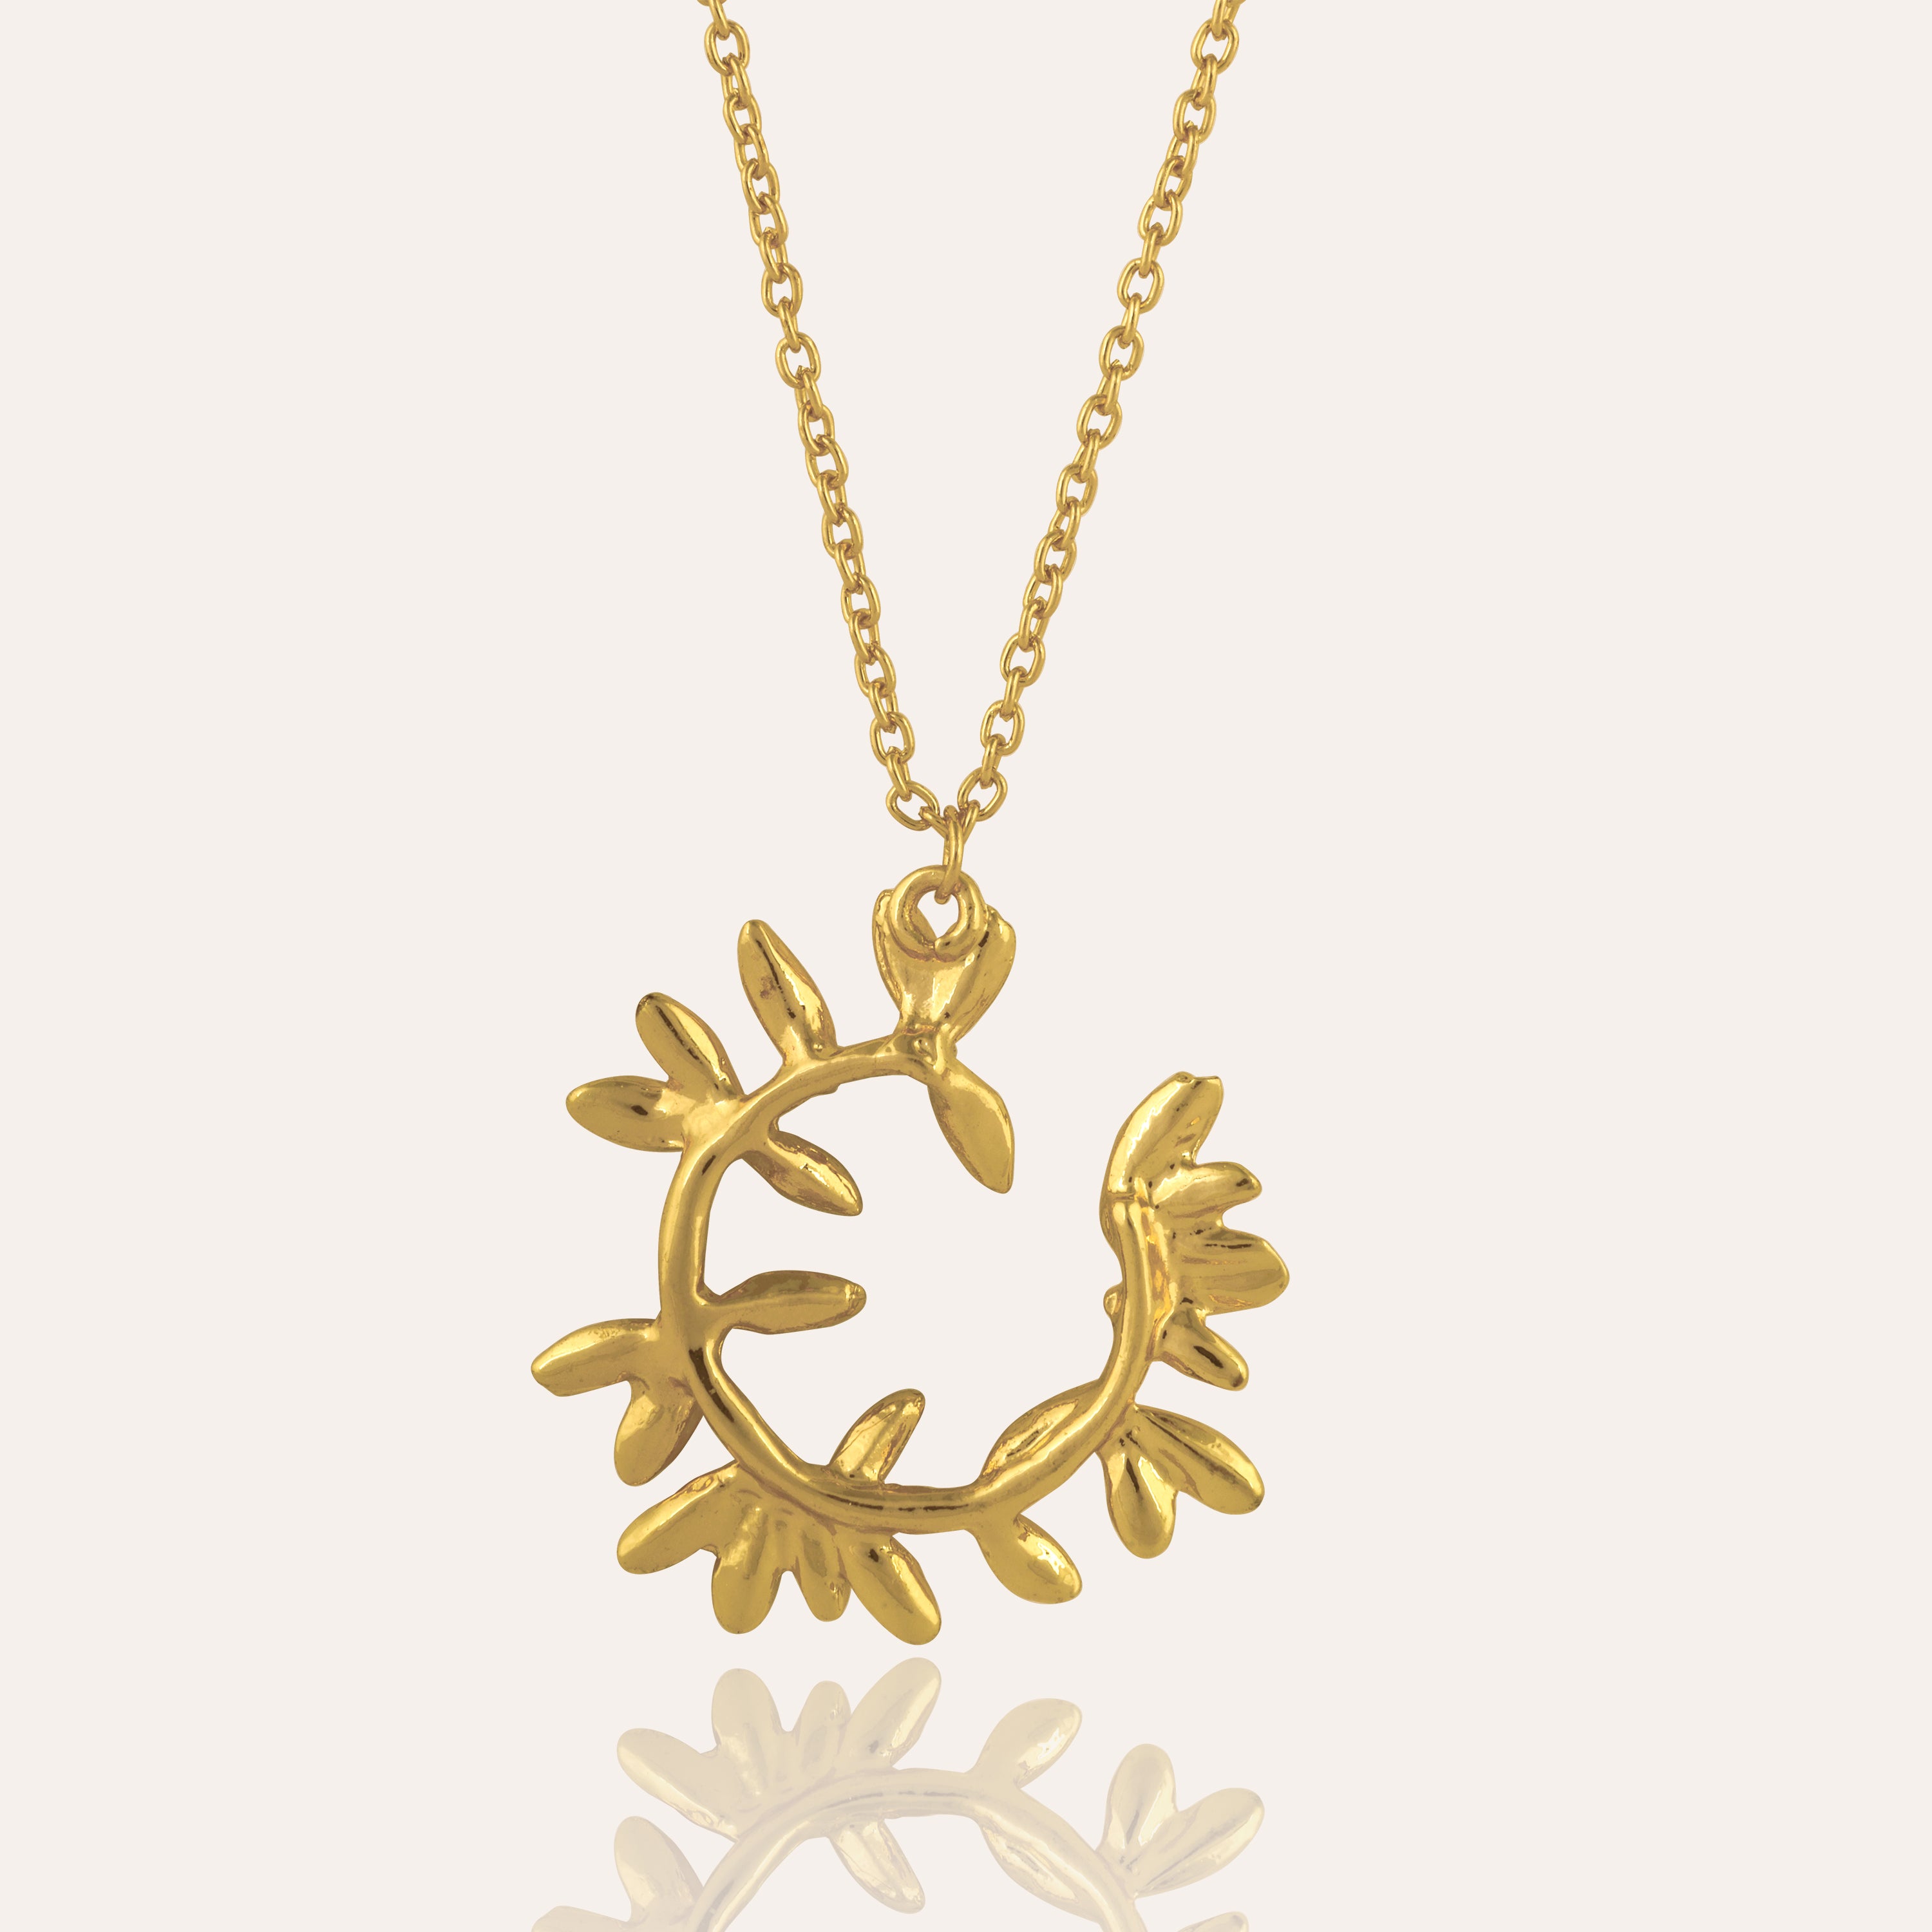 TFC Golden Leaves Gold Plated Pendant Necklace-Enhance your elegance with our collection of gold-plated necklaces for women. Choose from stunning pendant necklaces, chic choker necklaces, and trendy layered necklaces. Our sleek and dainty designs are both affordable and anti-tarnish, ensuring lasting beauty. Enjoy the cheapest fashion jewellery, lightweight and stylish- only at The Fun Company